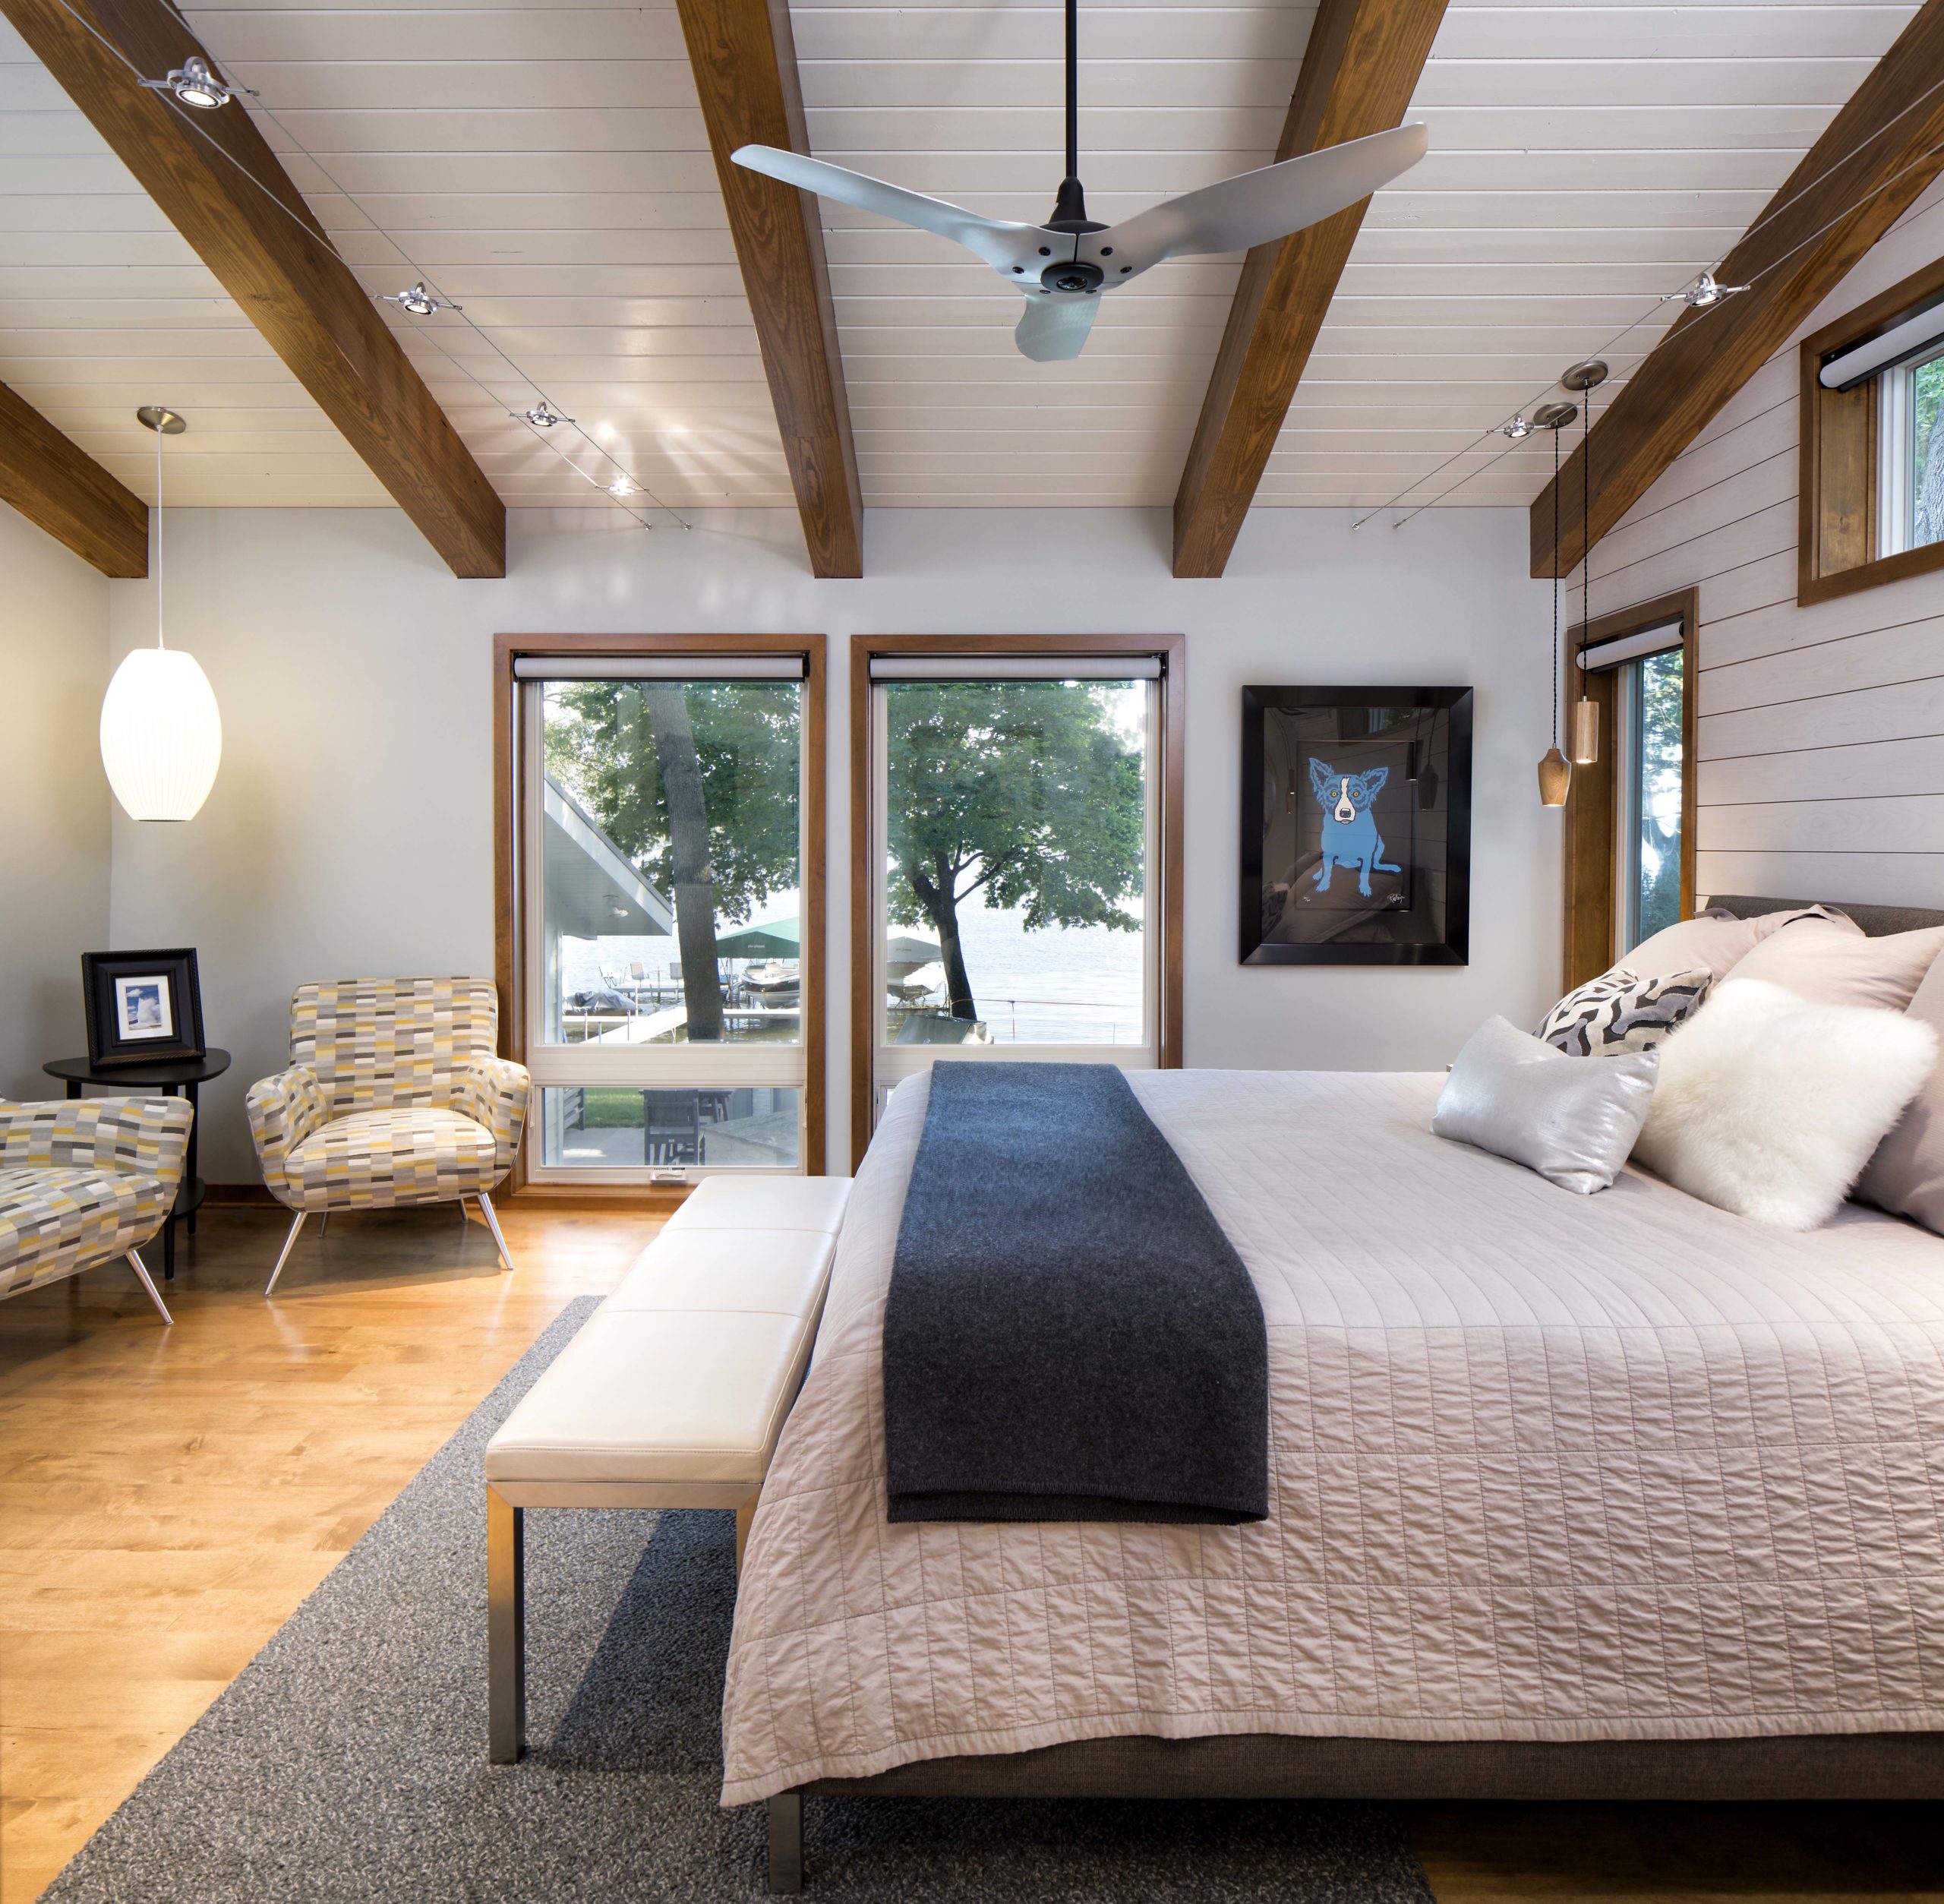 A bedroom with wood ceilings and a bed.